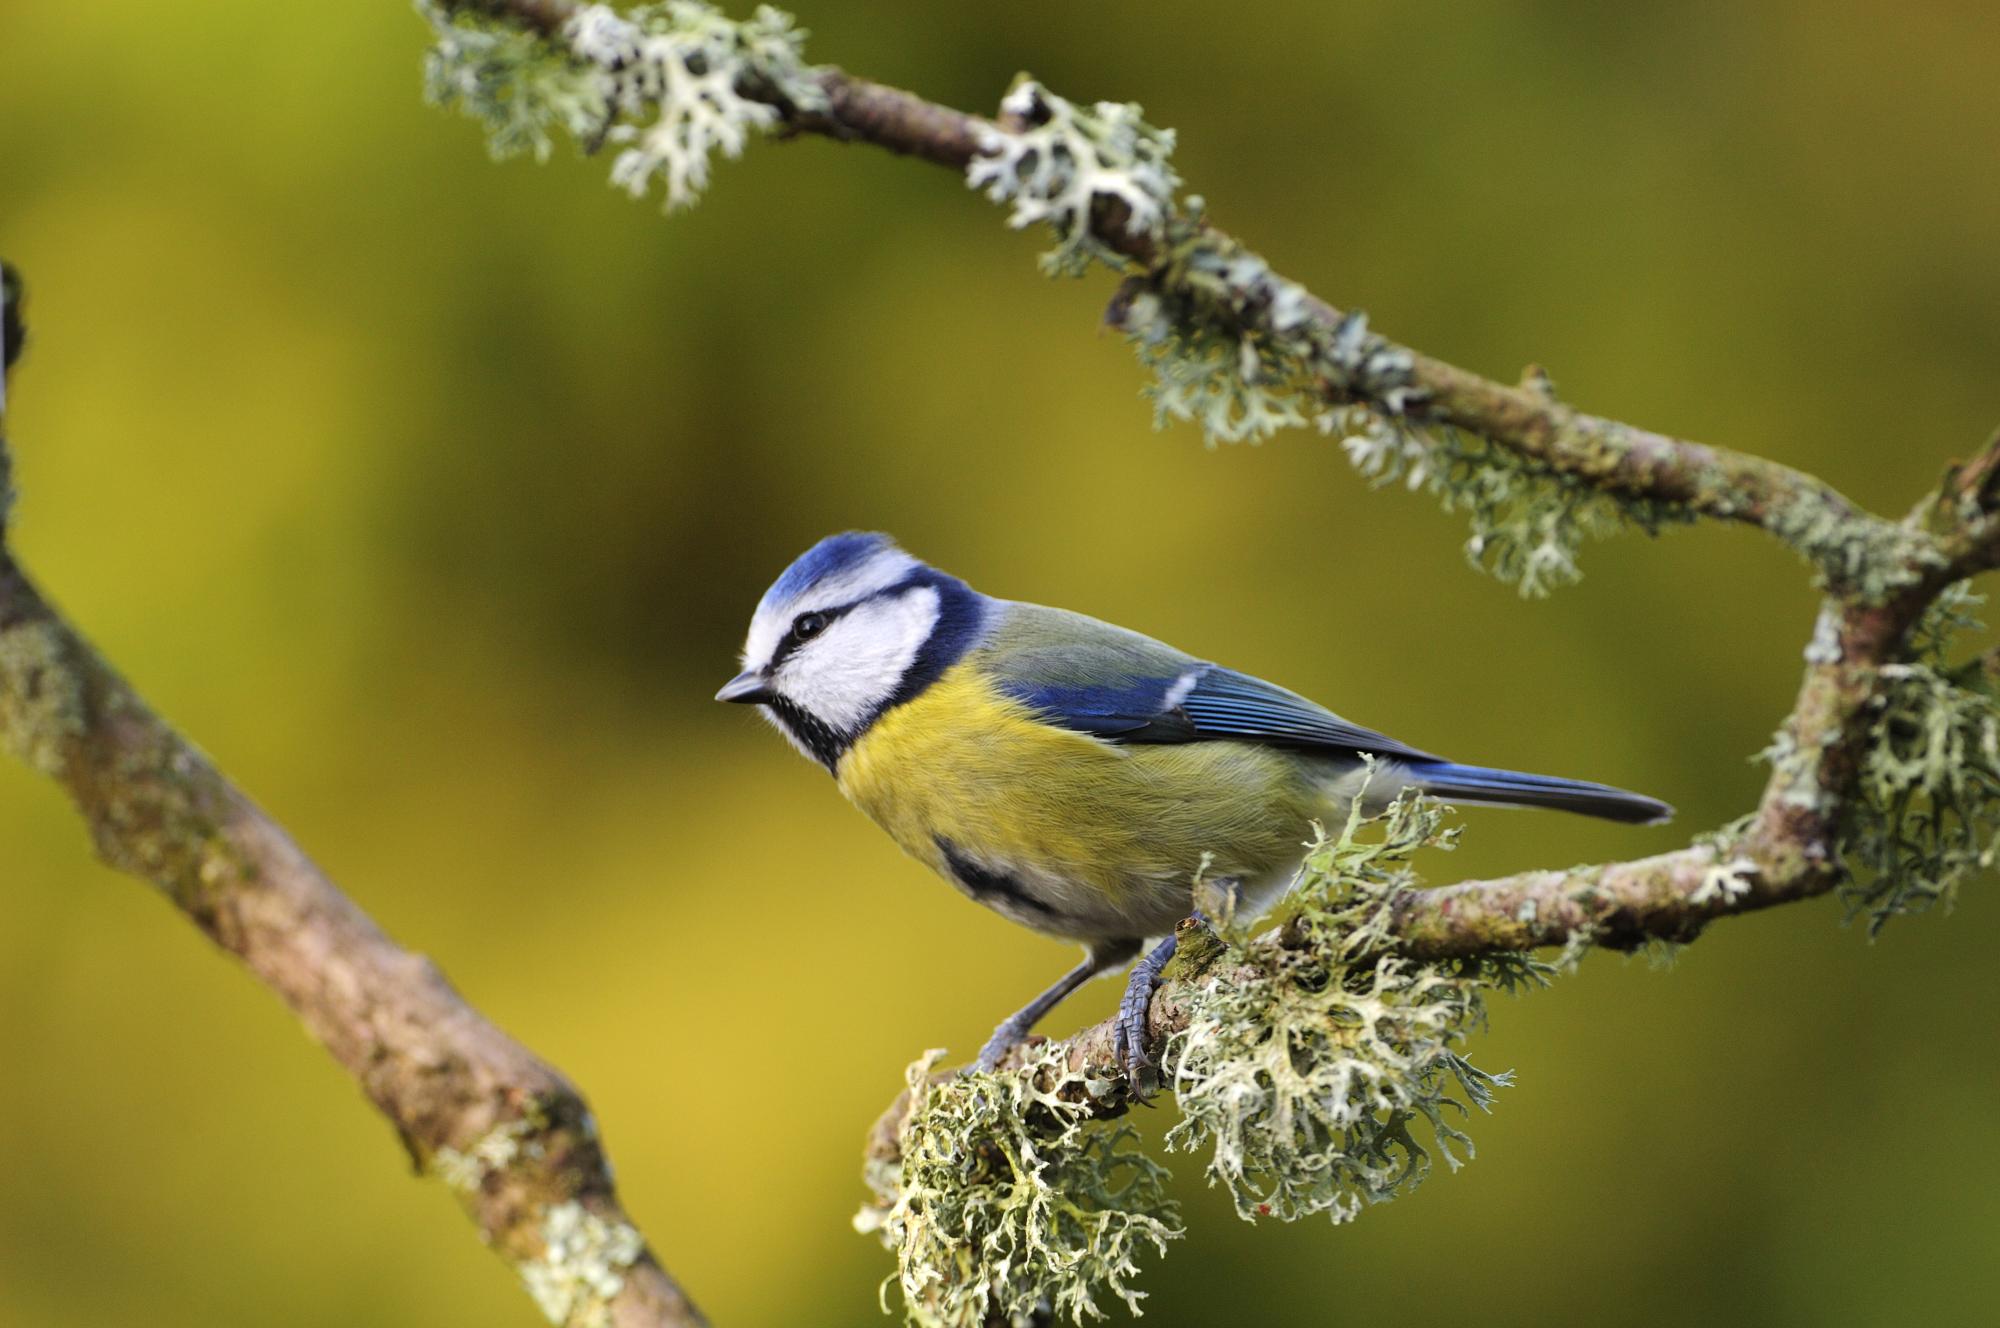 Blue tit (Cyanistes caeruleus) perching on a lichen covered branch ©Lorne Gill/SNH. For information on reproduction rights contact the Scottish Natural Heritage Image Library on Tel. 01738 444177 or www.nature.scot